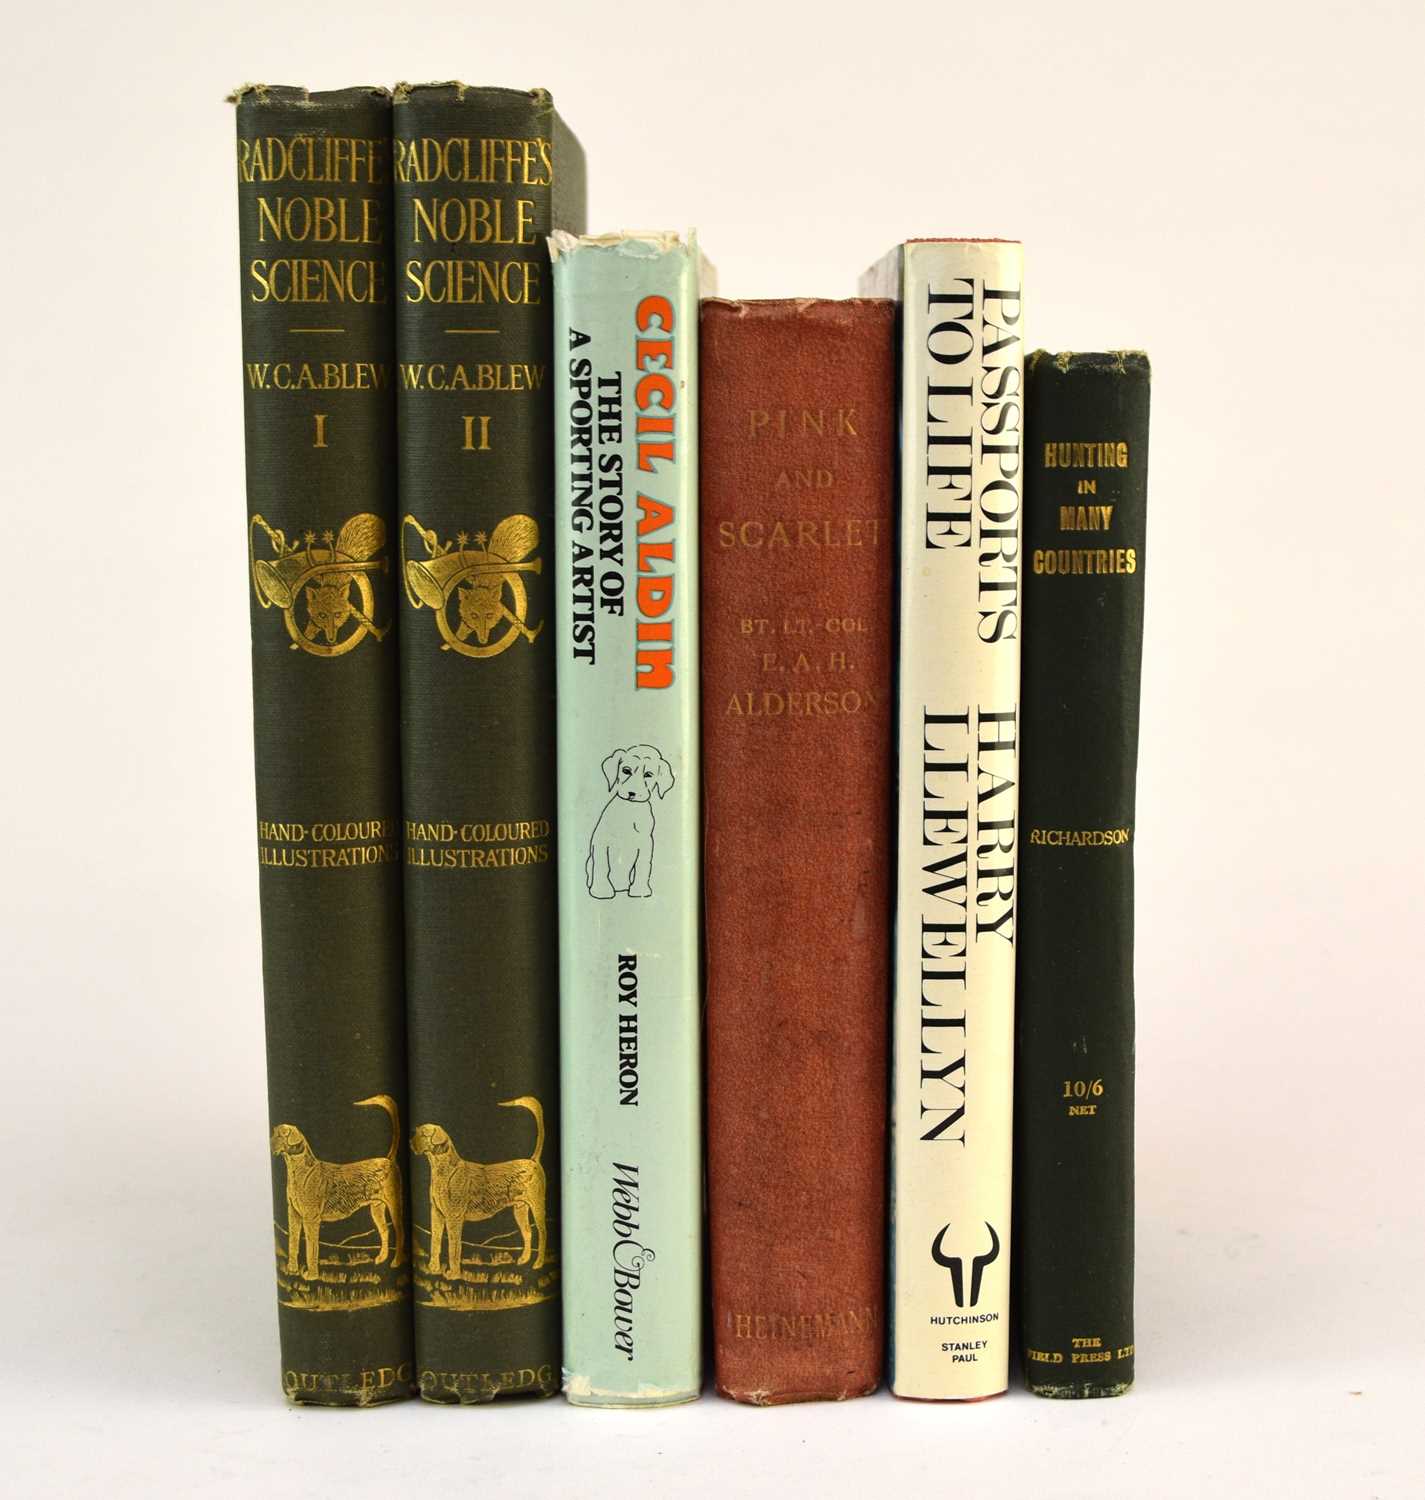 Lot 1012 - RADCLIFFE, FP DELMÉ, The Noble Science, A Few General Ideas on Fox Hunting